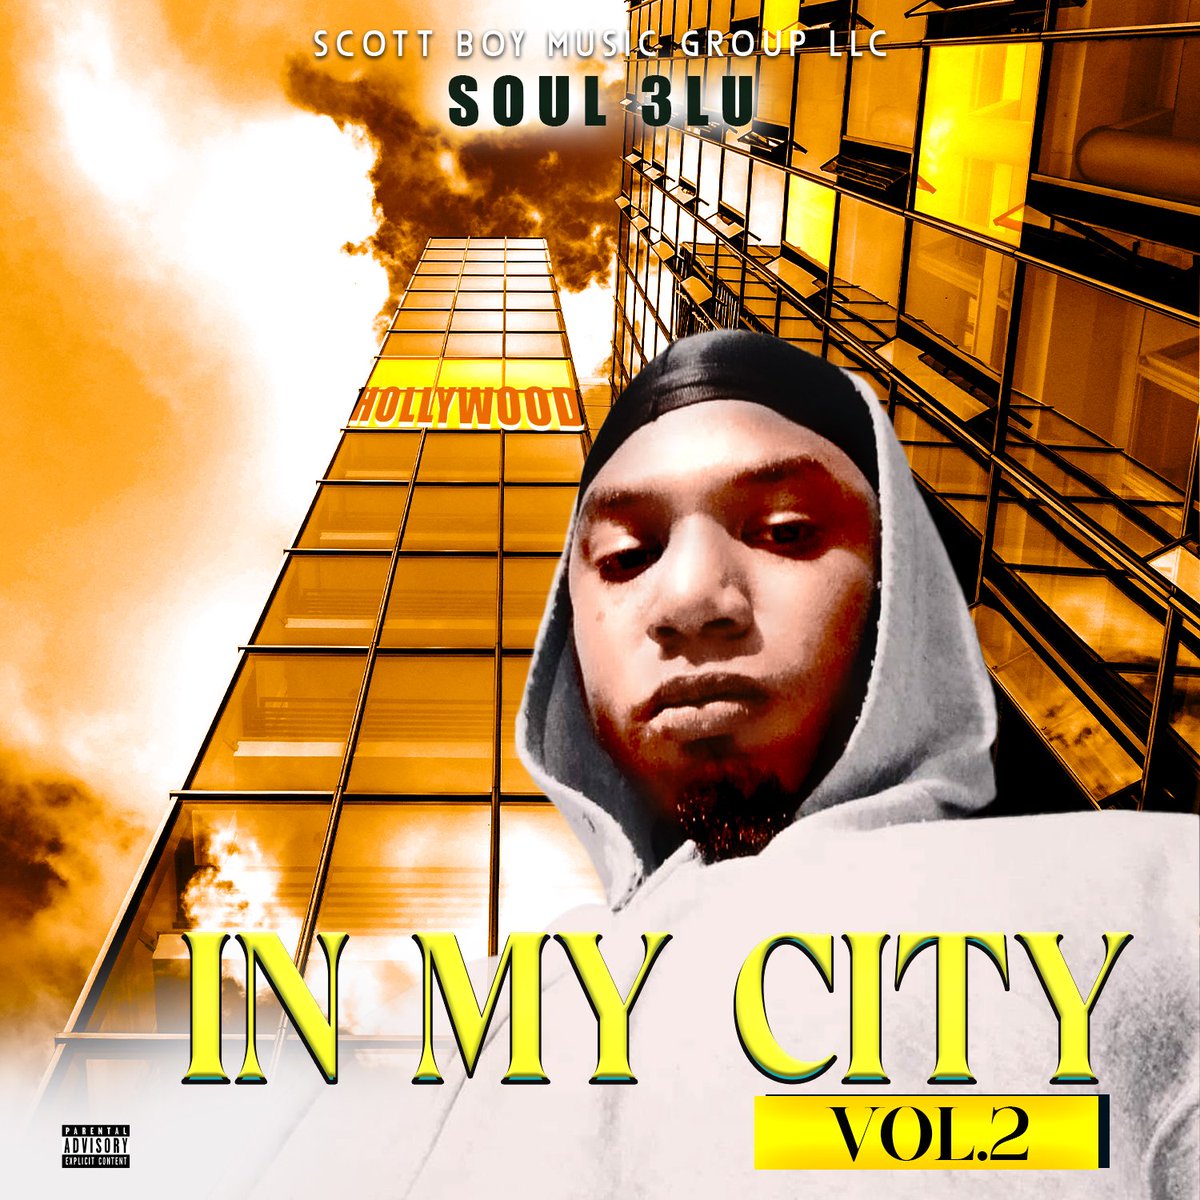 NEW EP 'IN MY CITY VOL.2' WILL BE AVAILABLE ON ALL STREAMING PLATFORMS 5/27/24 @symphonicdist @Soul3lu2 #sbmg #scottboymusicgroup #newmusic #rapmusic #rapalbum